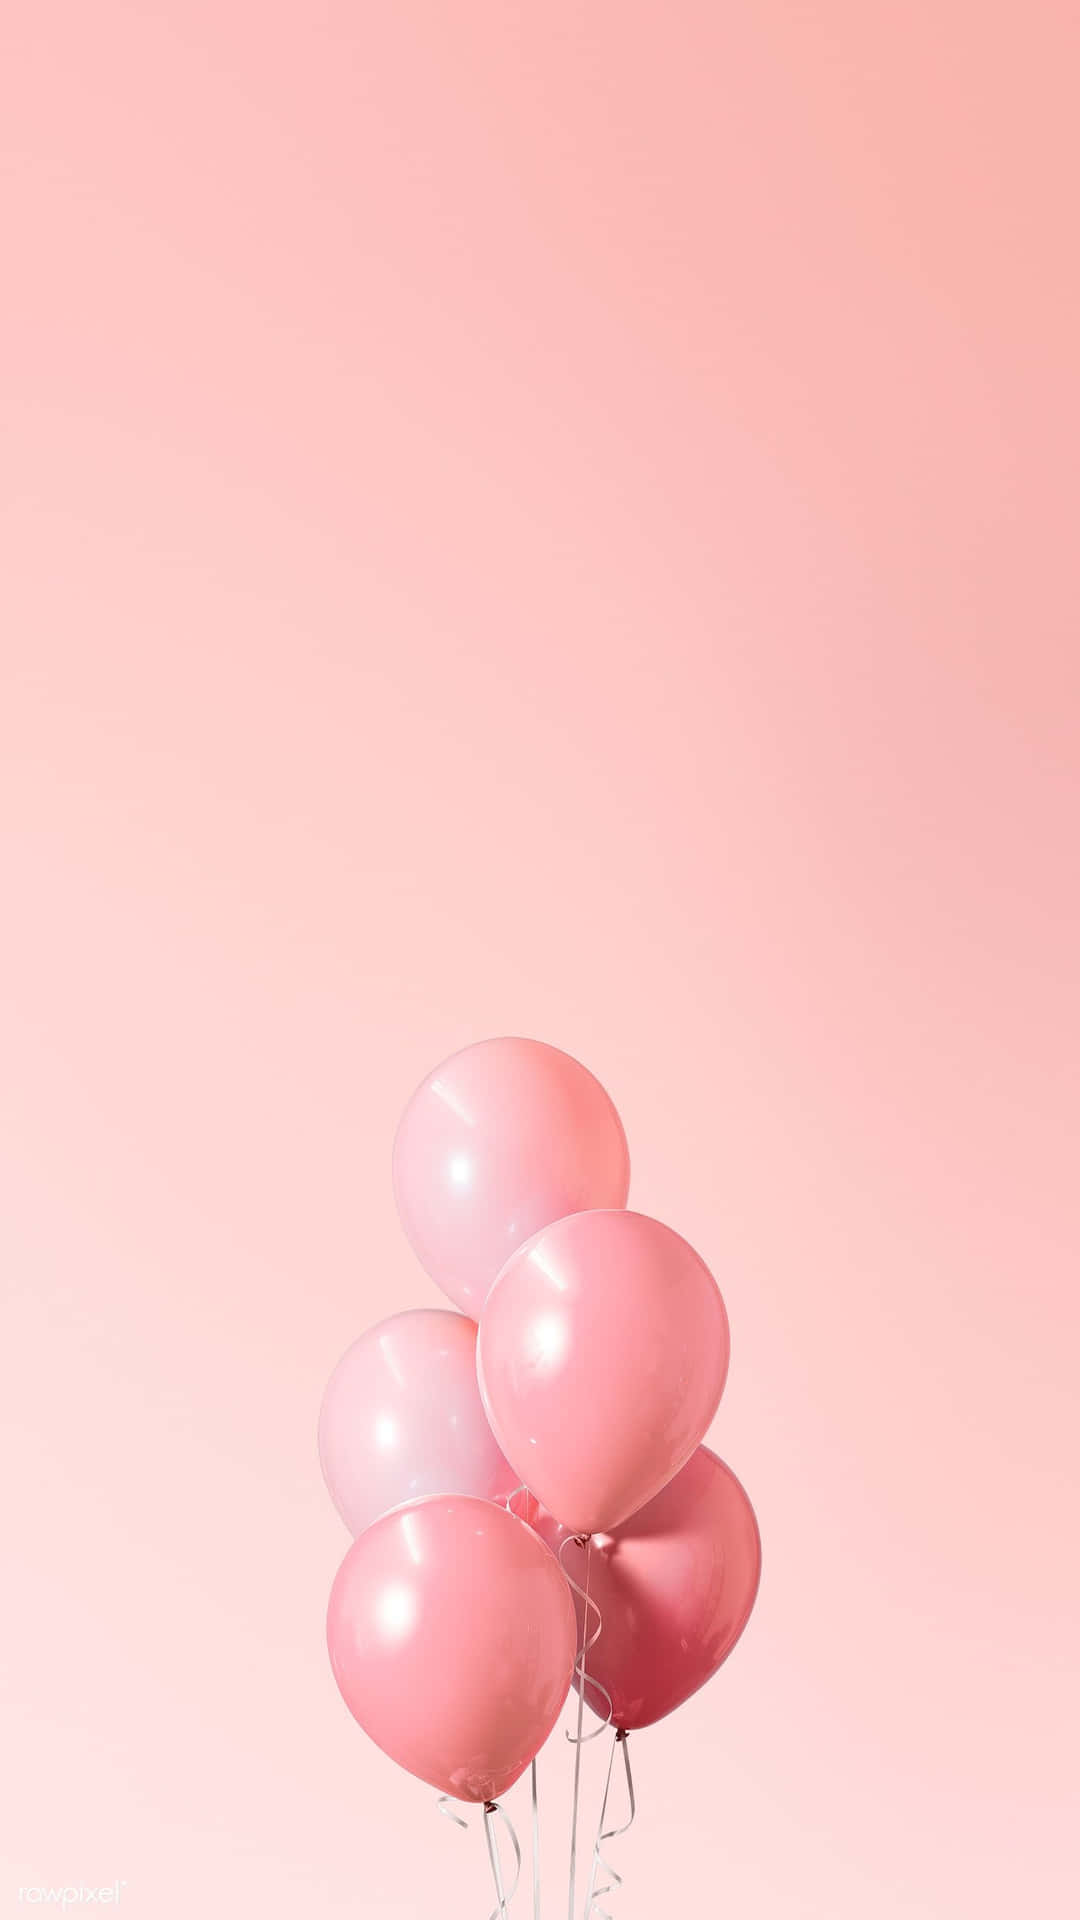 Celebrate with Pink Balloons!